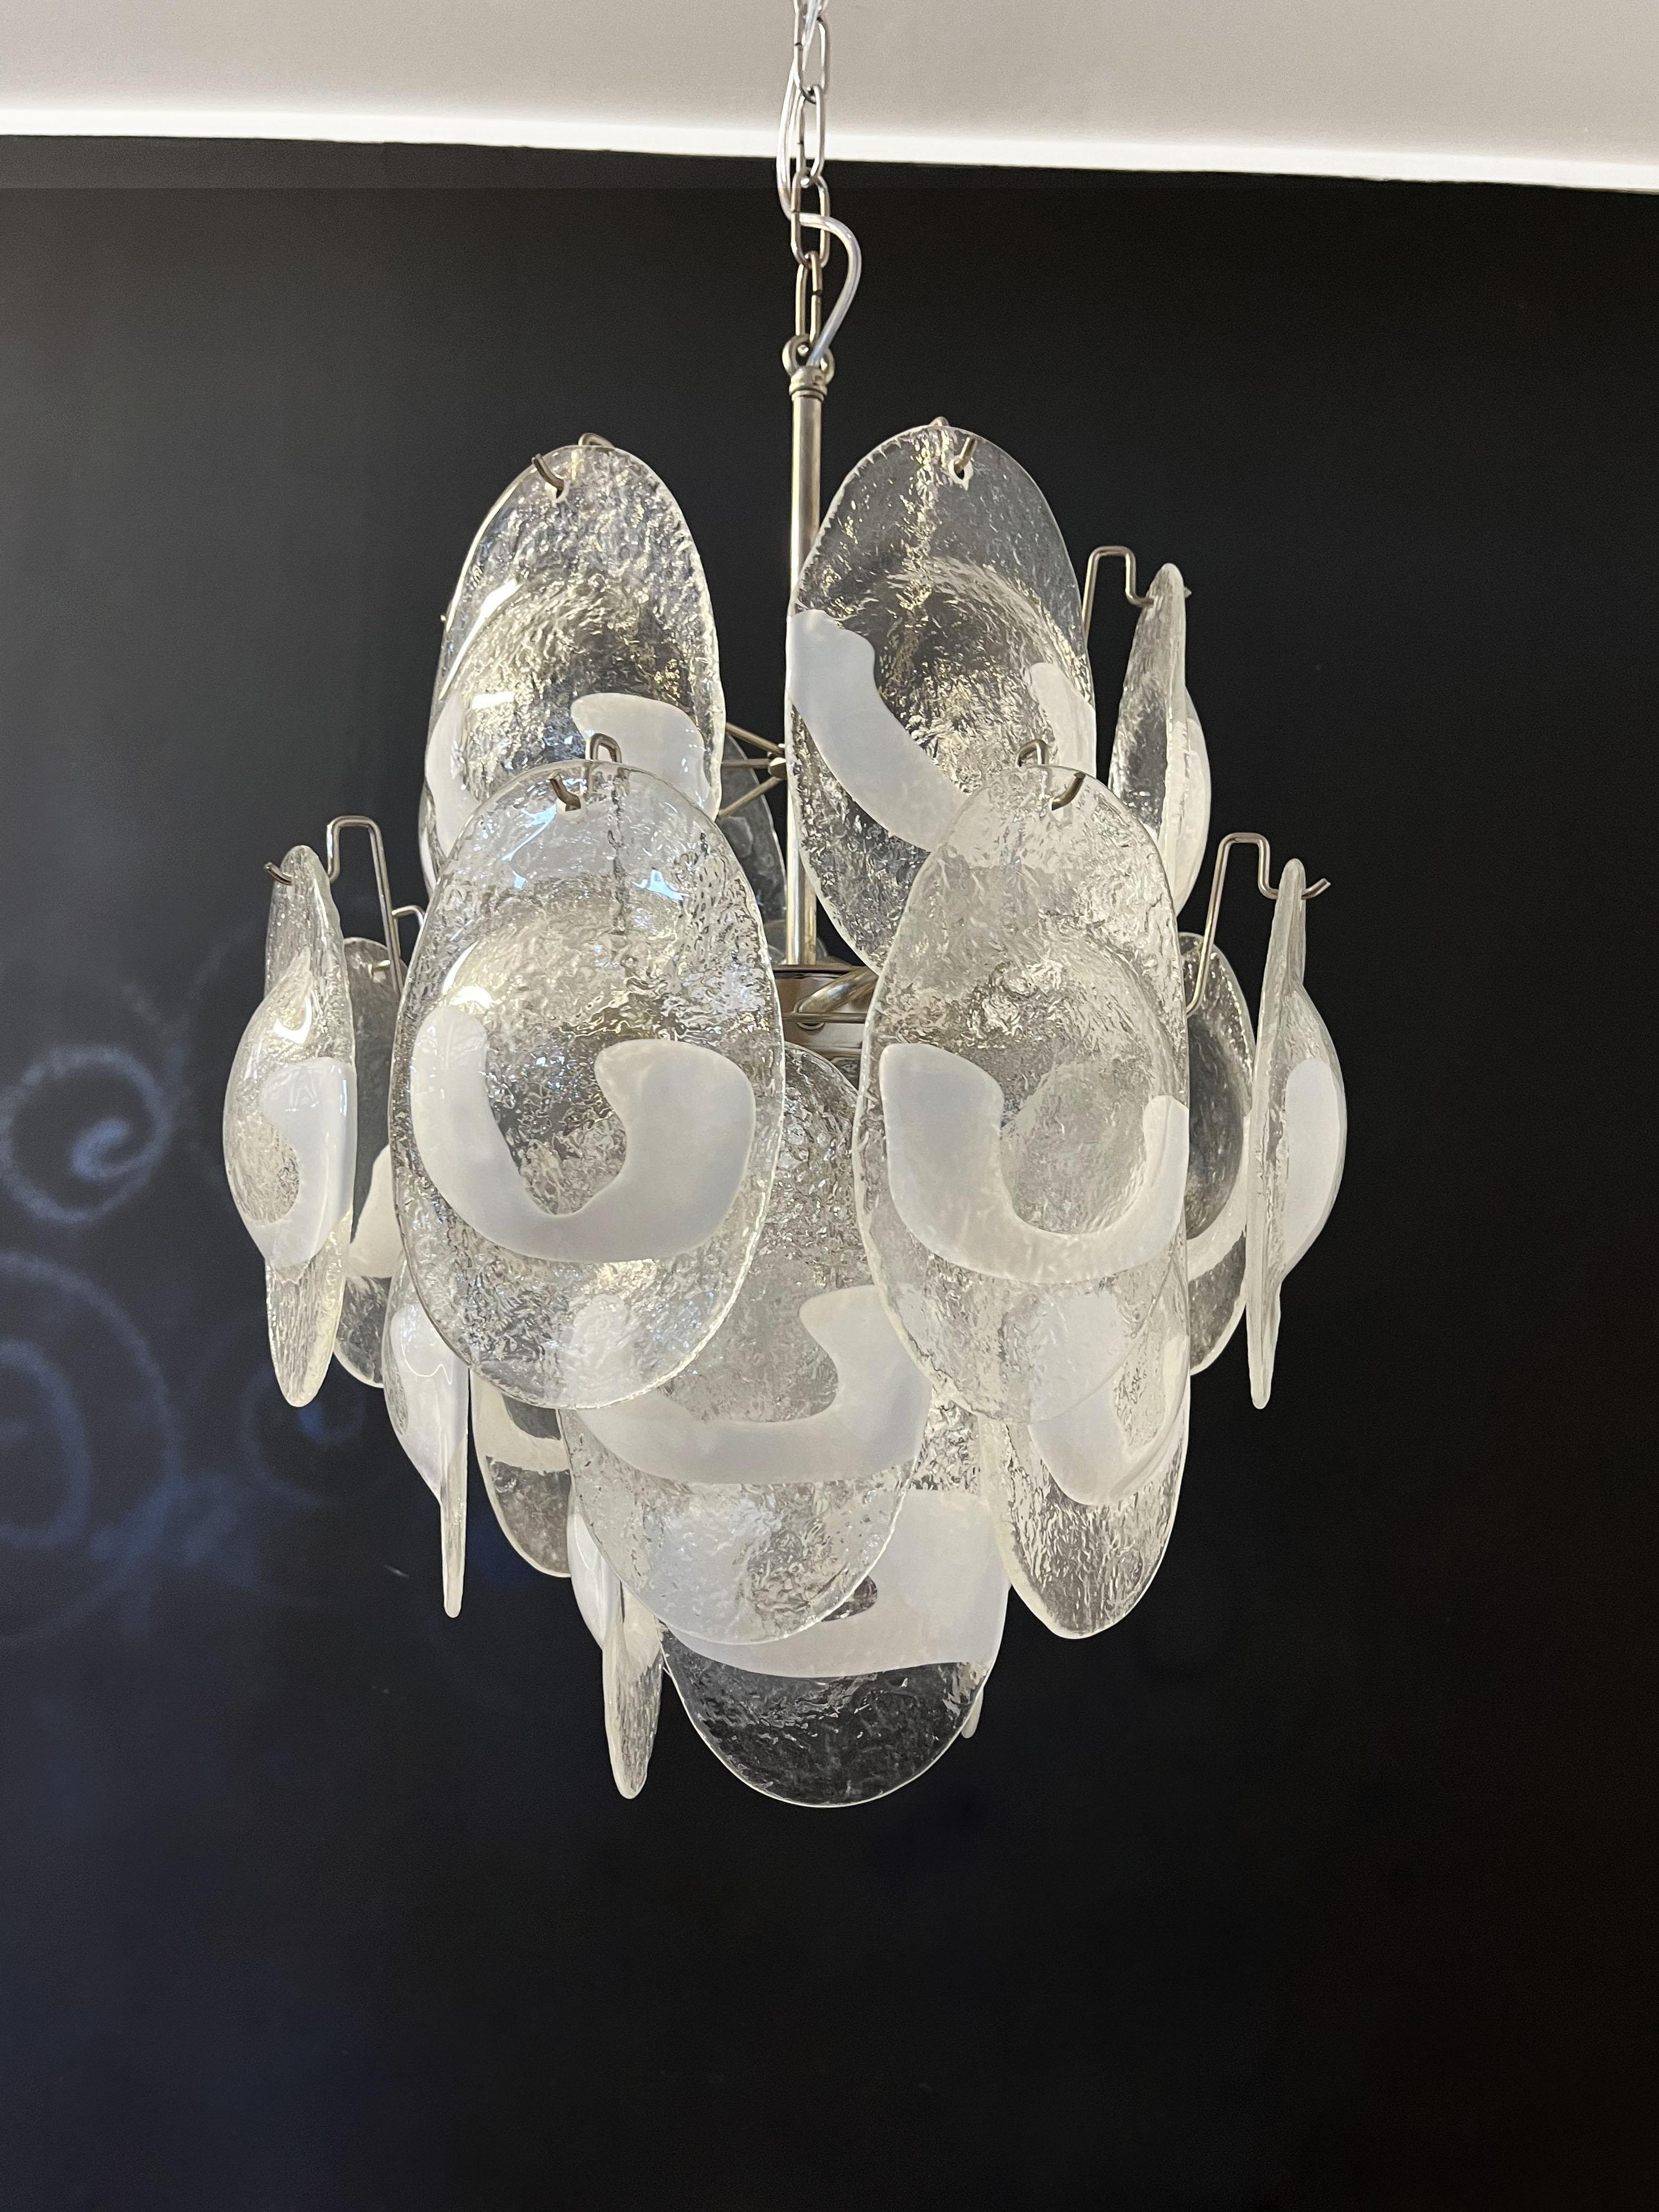 Vintage Italian Murano chandelier in Vistosi style. The chandelier has 24 glasses in a nickel metal frame. The originality of this chandelier is given by the glass, wonderful works of art trasparent and white lattimo, called shells. Murano blown